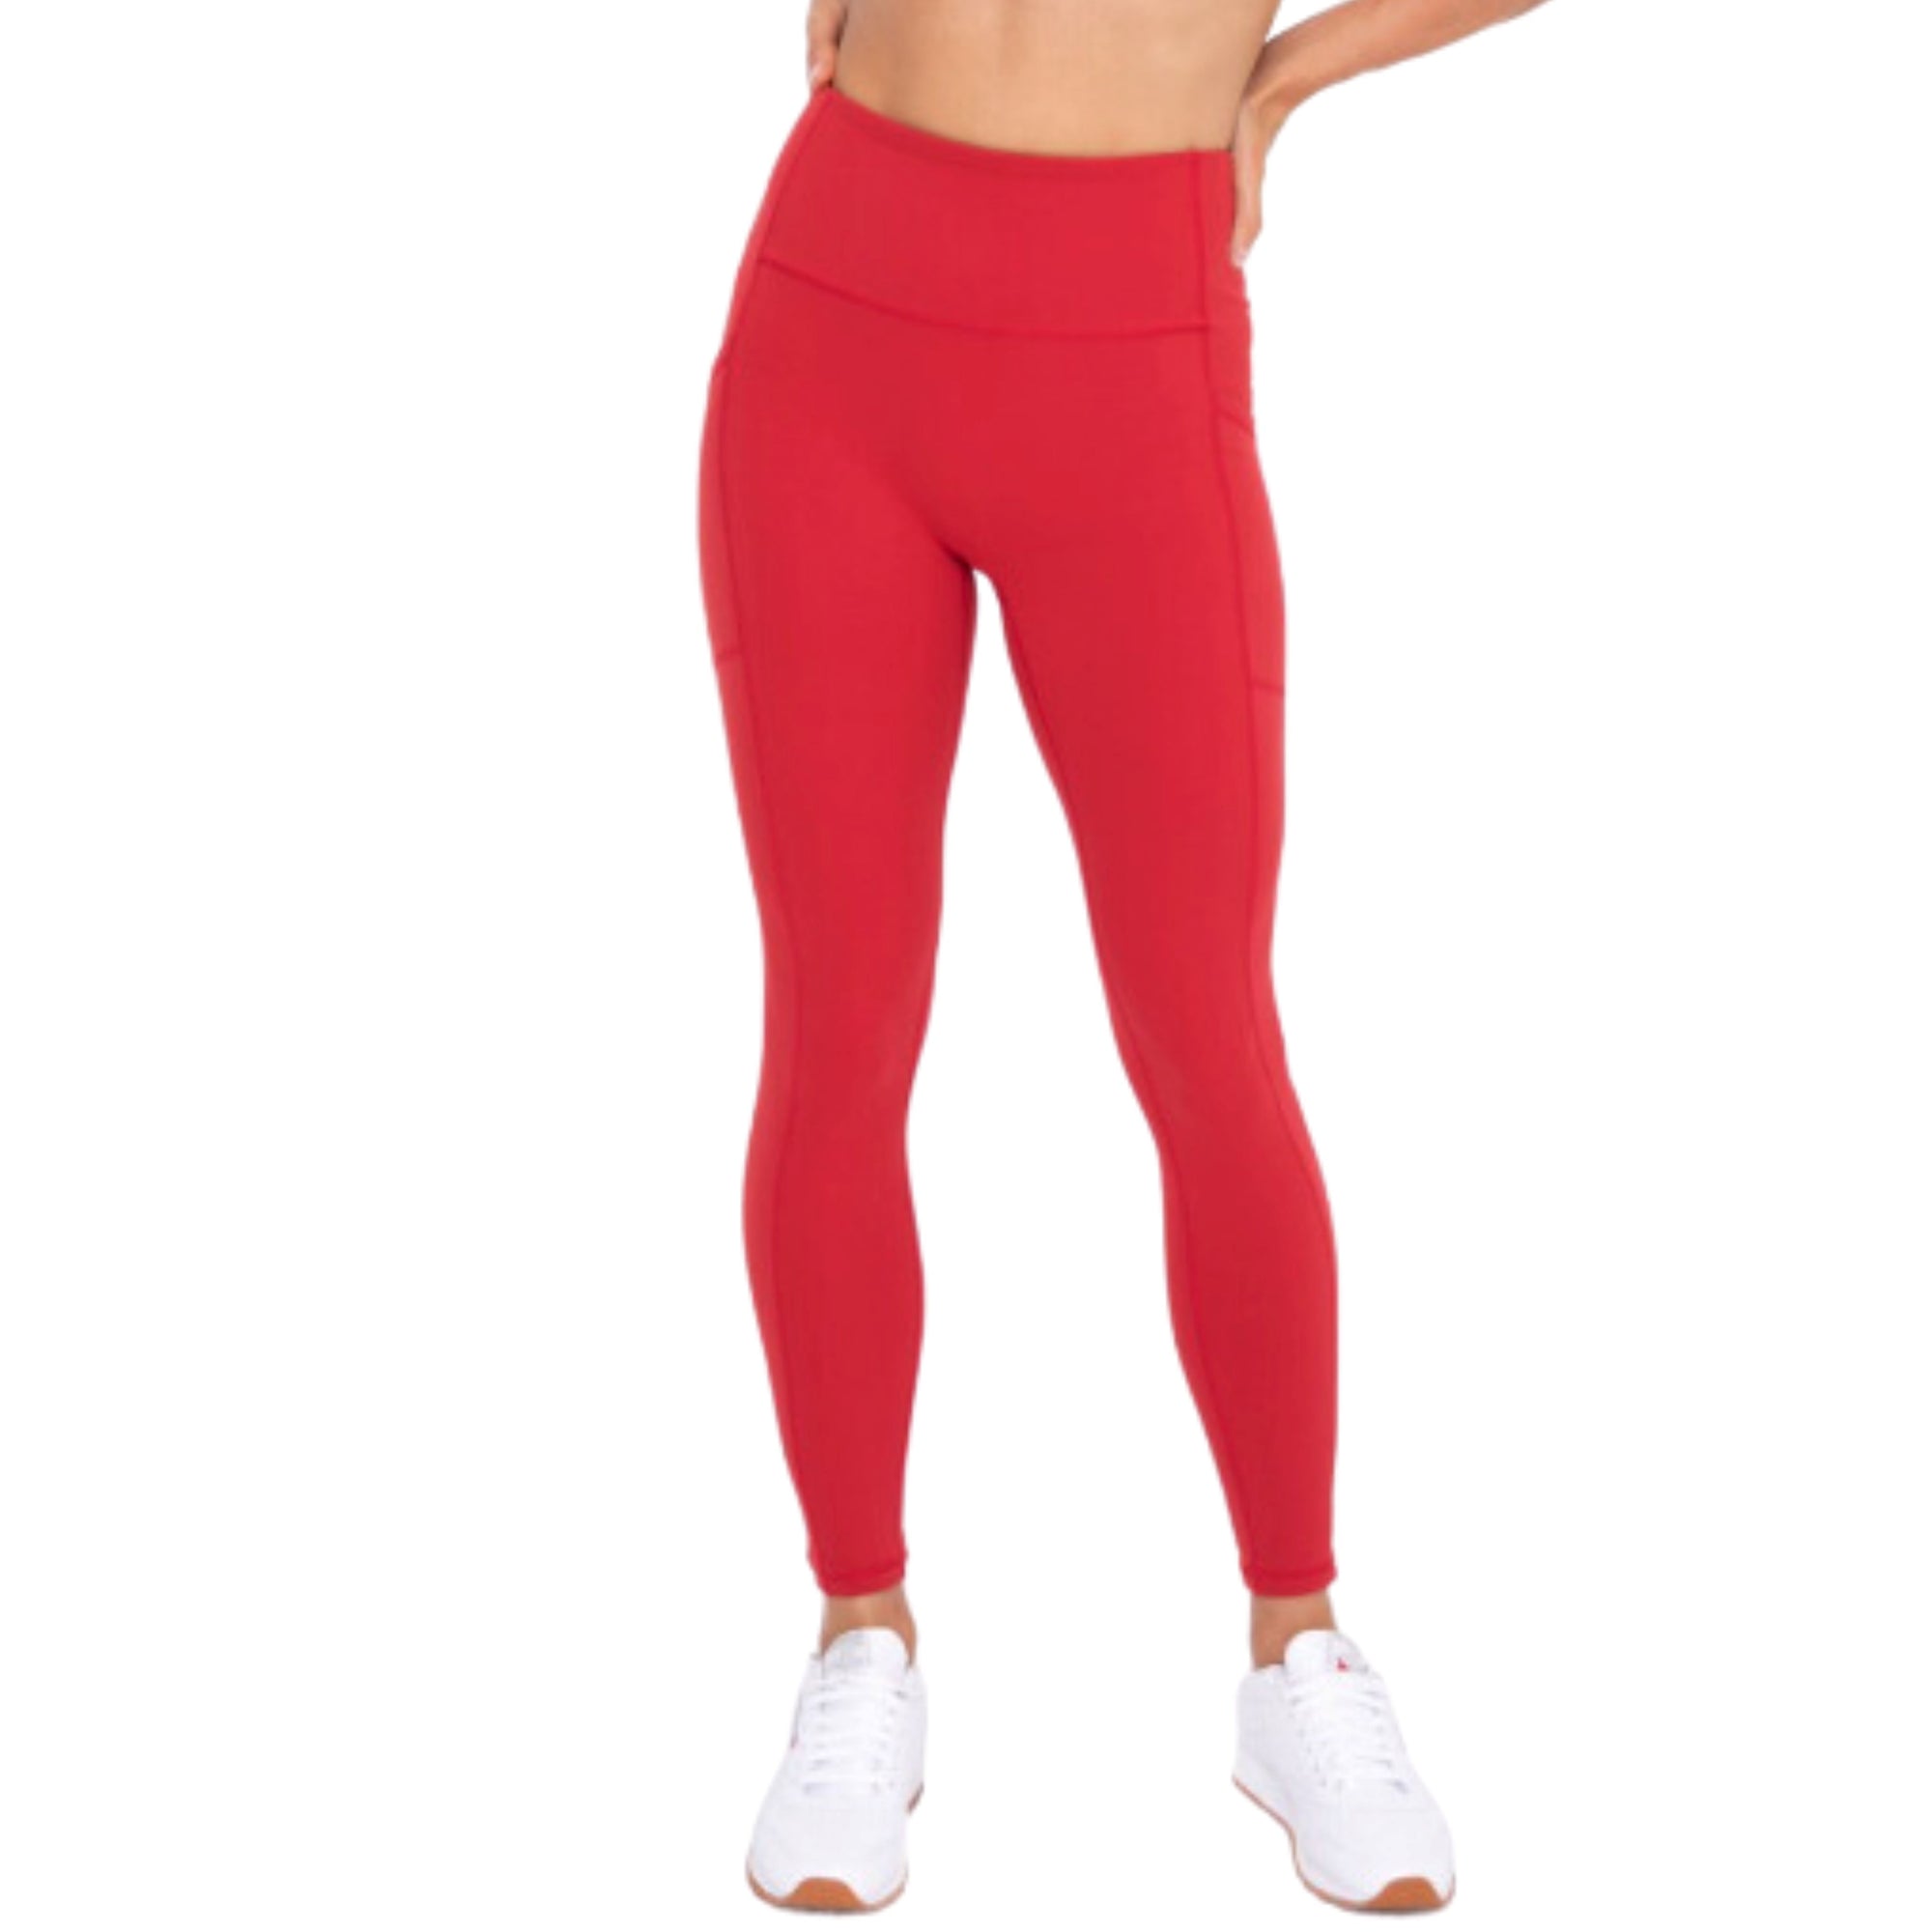 LYCRA Nvgtn Contour Seamless Yoga Leggings For Women Perfect For Workout,  Jogging, Hiking, Fitness, Gym And Sports Wholesale Best Running Tights  Women Size 231109 From Nian07, $14.33 | DHgate.Com